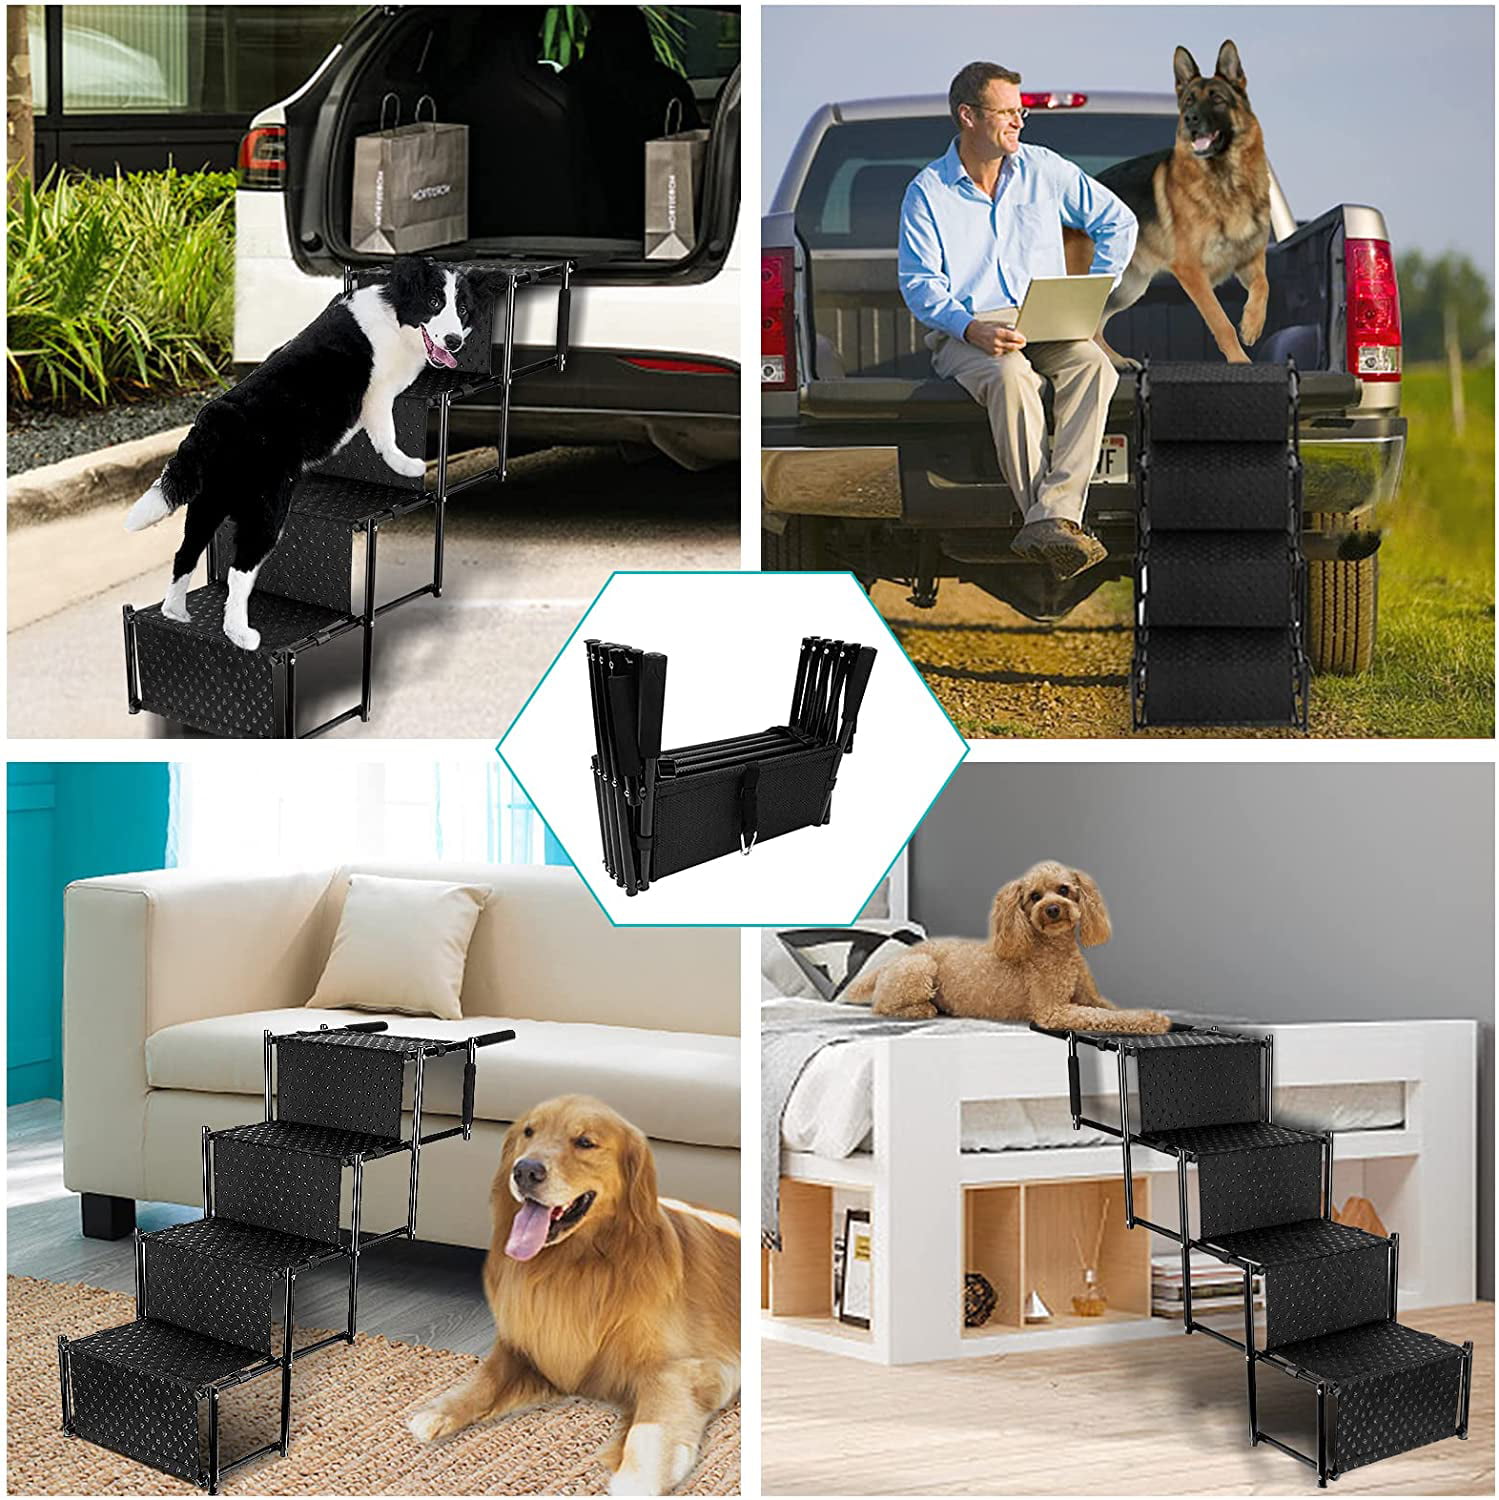 Nonslip 3-Step Dog Steps for High Beds Up to 110 Pounds Portable 2-in-1 Pet Ramp for Small to Large Dogs and Cats Niubya Wooden Foldable Dog Stairs Couch and Cars 